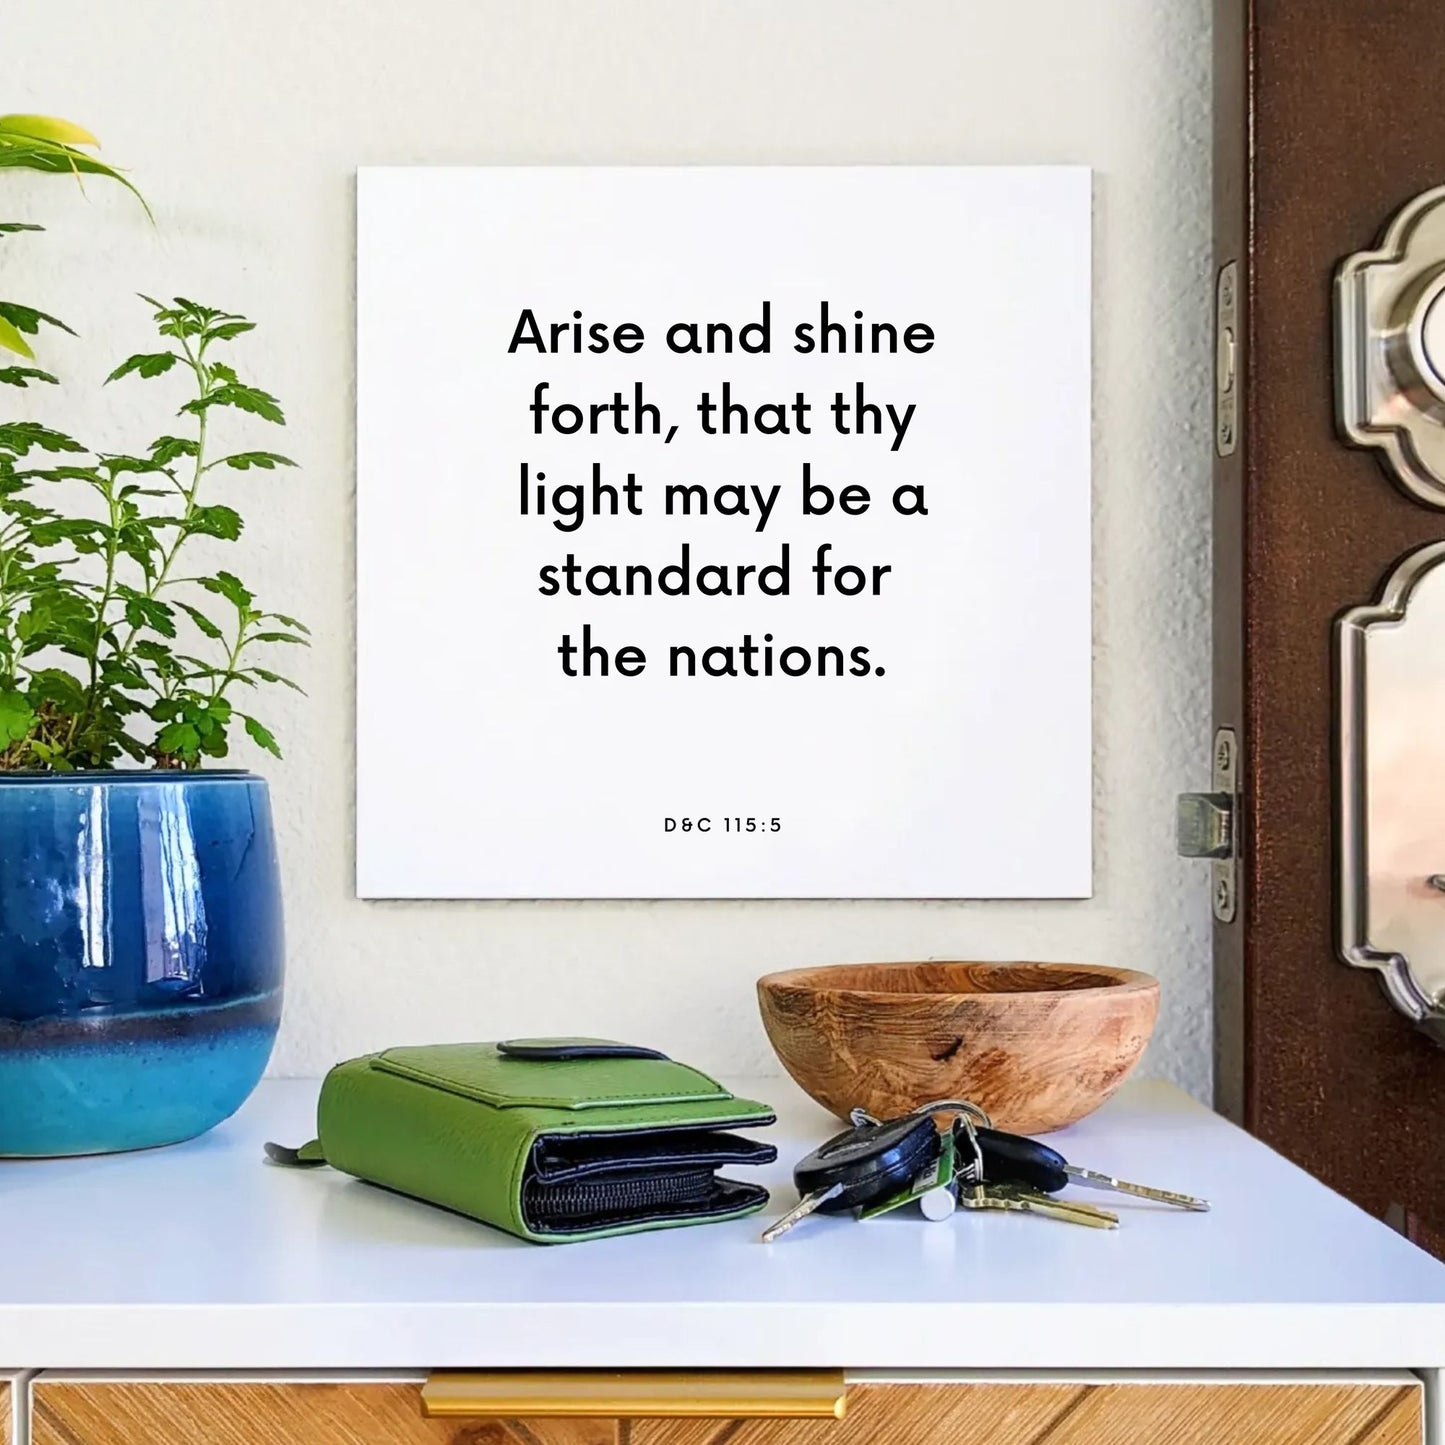 Entryway mouting of the scripture tile for D&C 115:5 - "Arise and shine forth, that thy light may be a standard"